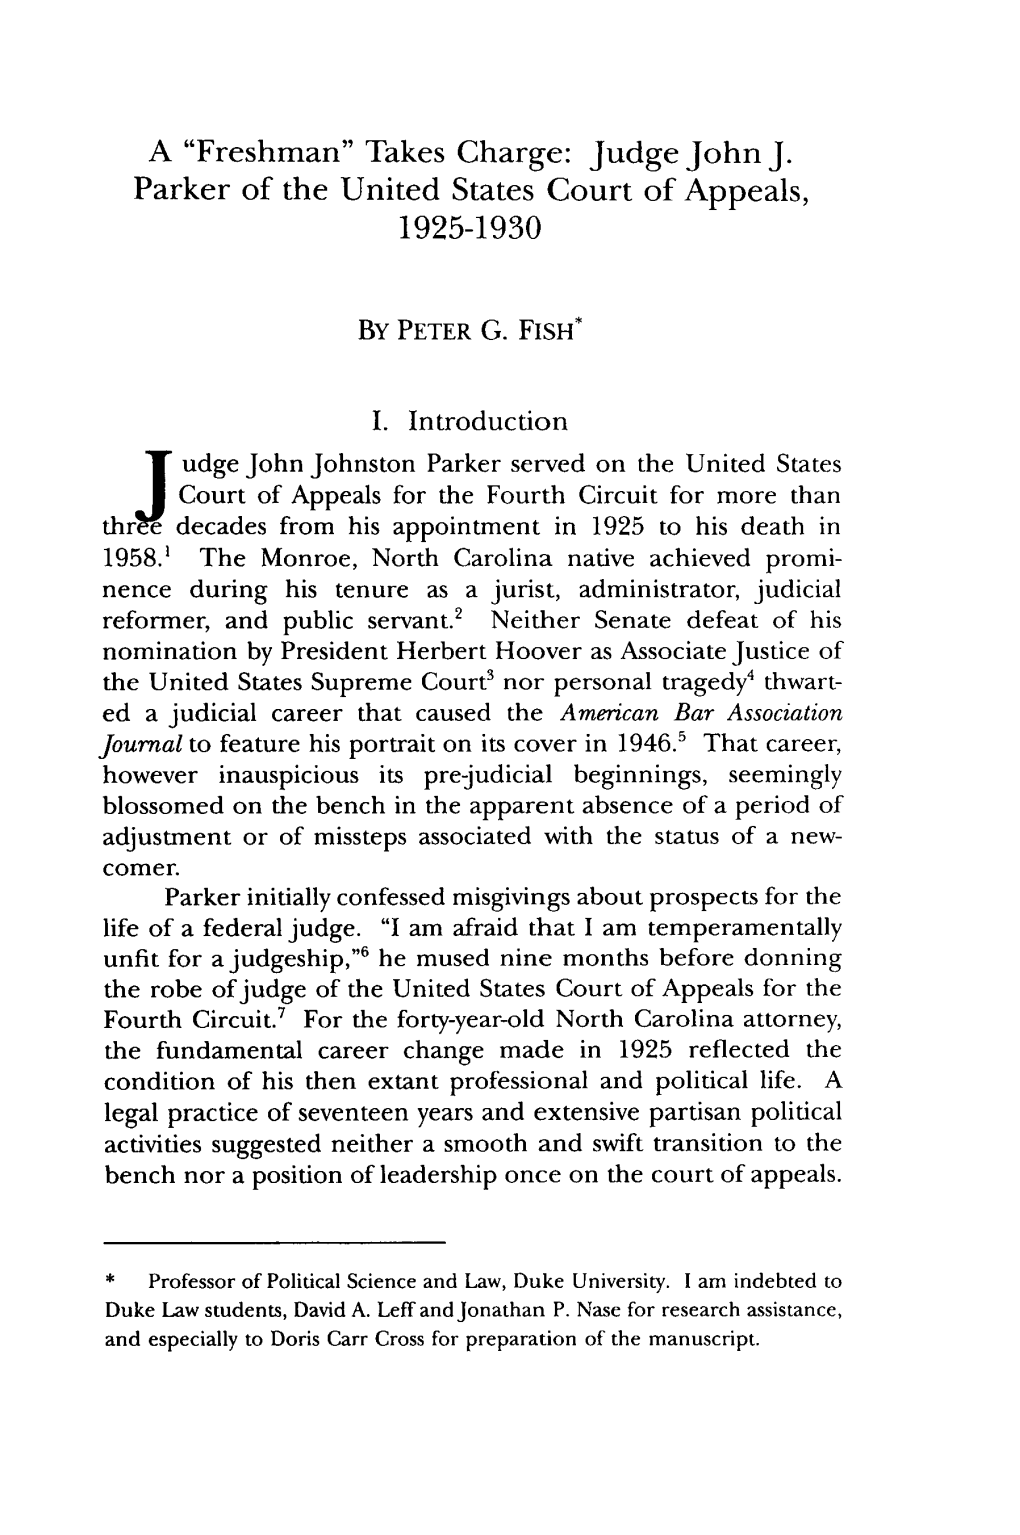 Takes Charge: Judge John J. Parker of the United States Court of Appeals, 1925-1930